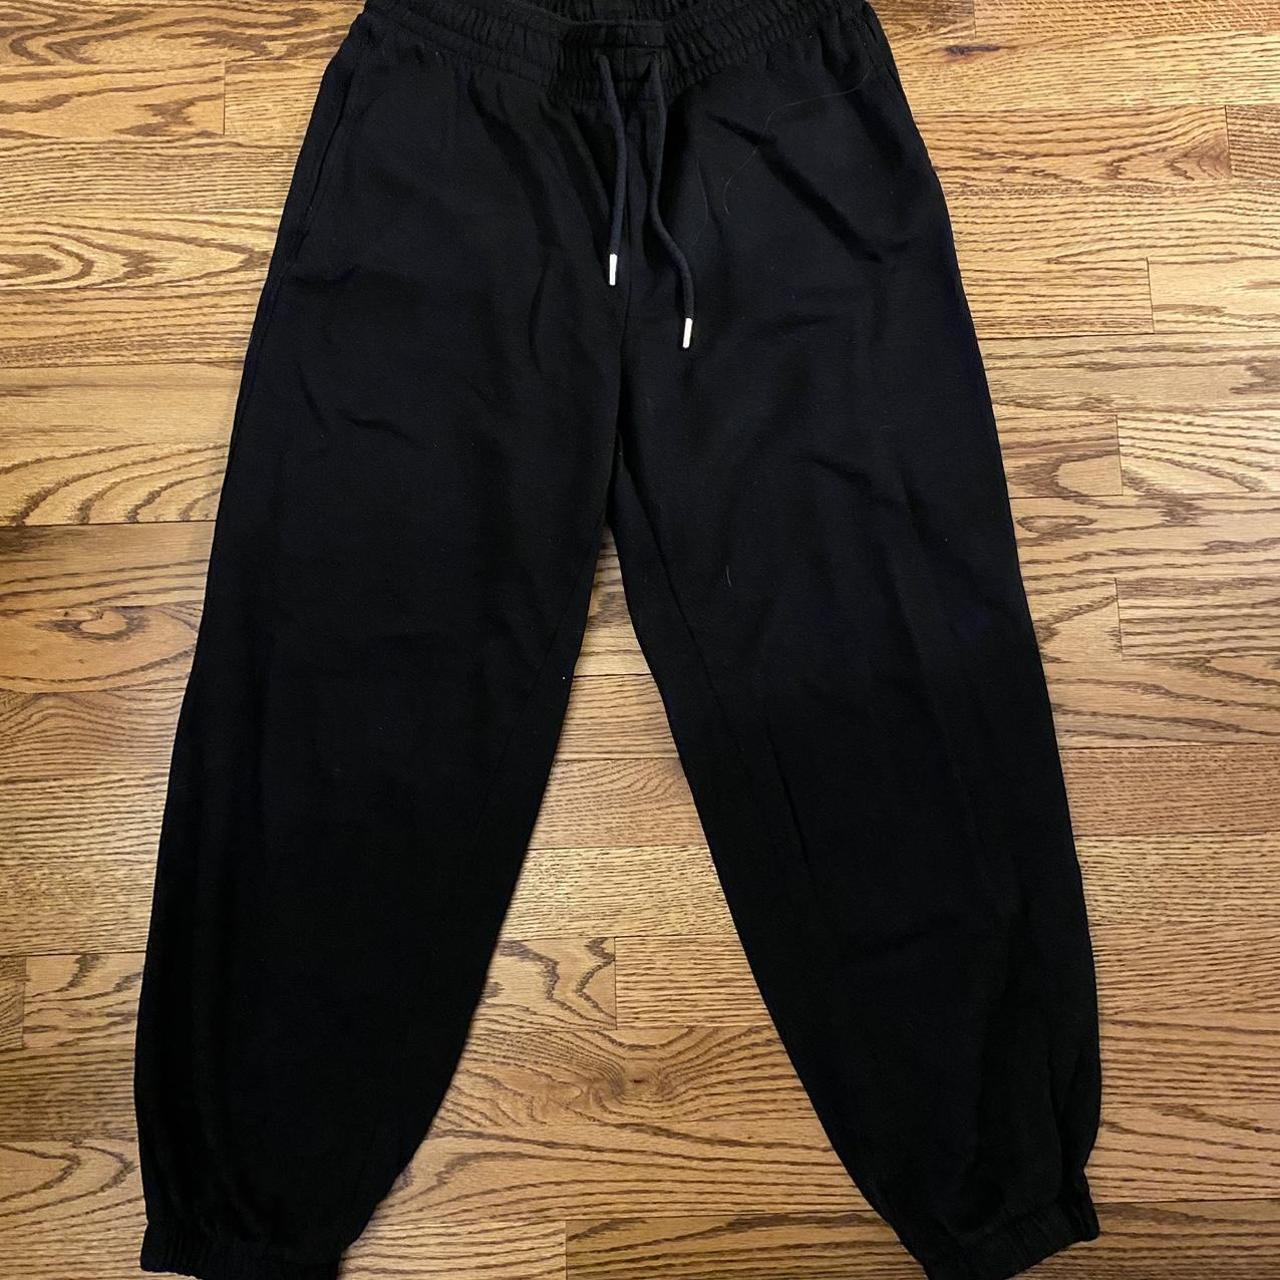 H&M joggers All black joggers with drawstring... - Depop